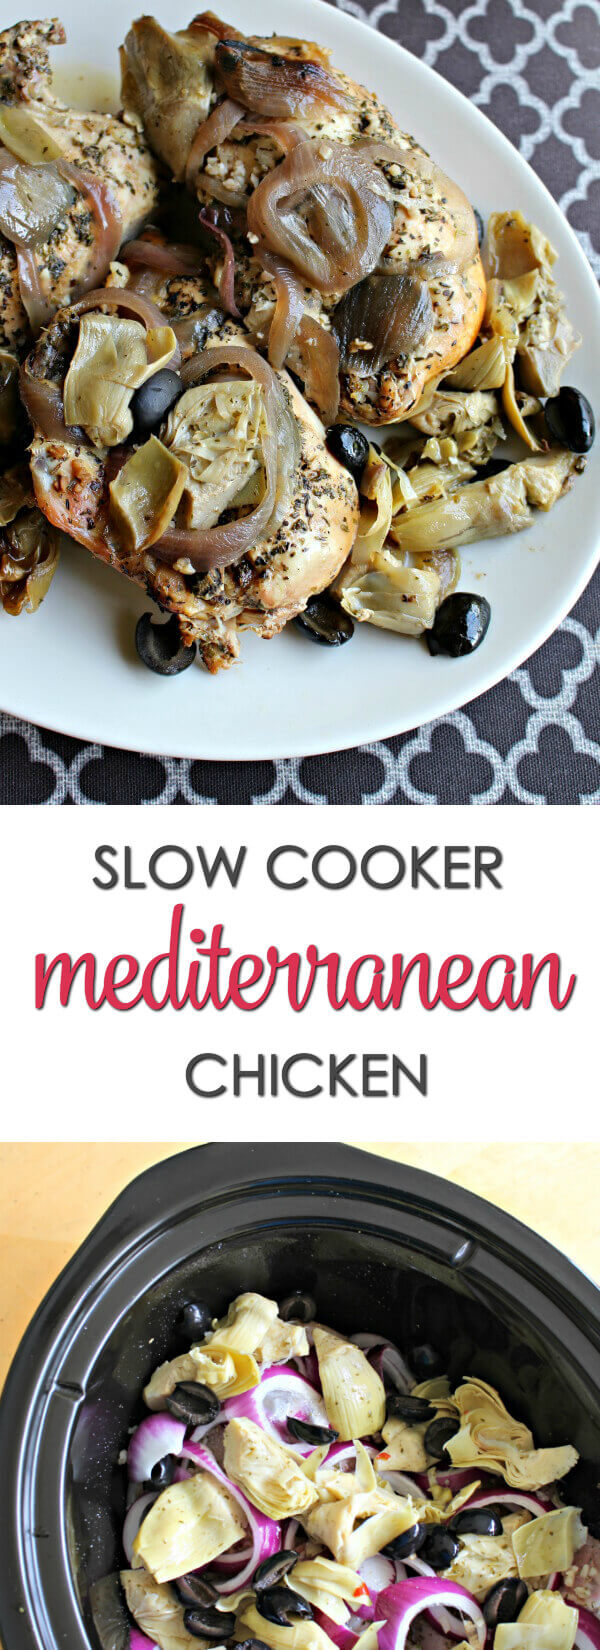 Top Photo: Slow Cooker Mediterranean Chicken on a white plate on top of a grey and white table cloth. Bottom Photo: Slow Cooker Mediterranean Chicken in a slow cooker. 